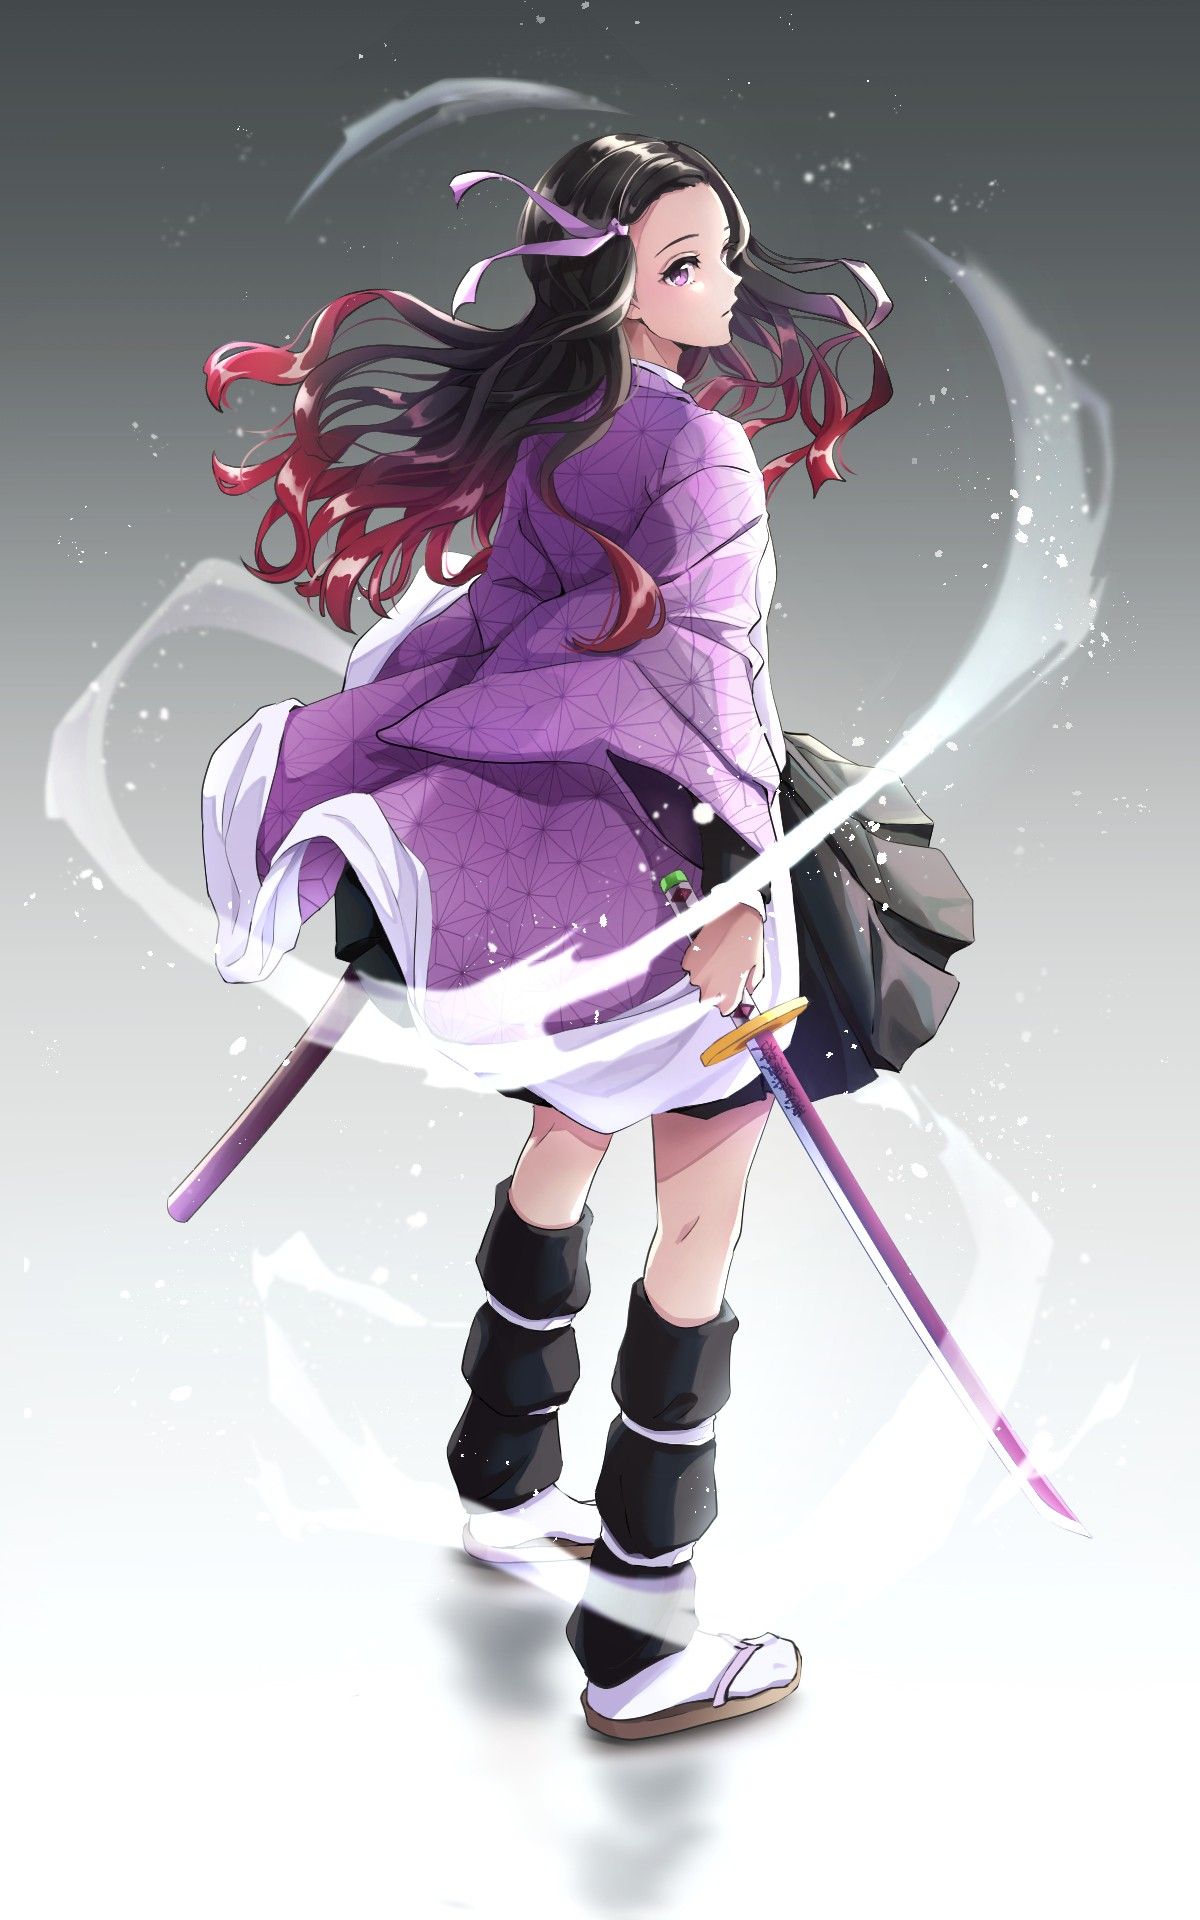 A girl with long hair and black boots holding two swords - Nezuko